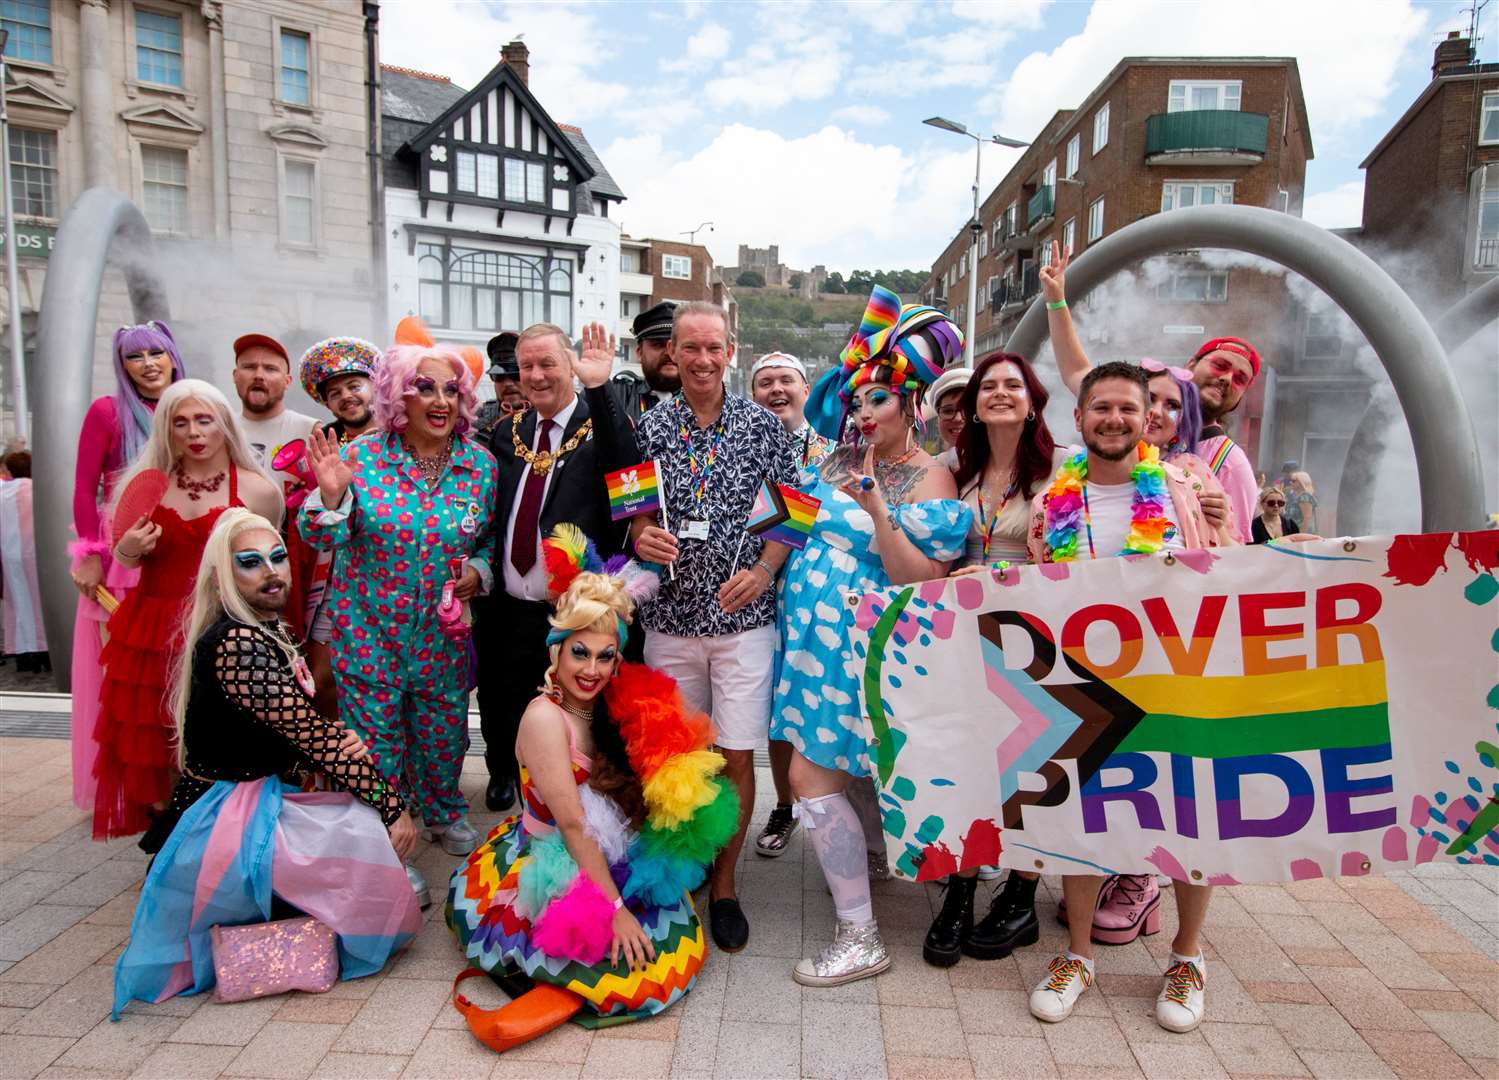 Dover Pride is taking place this weekend